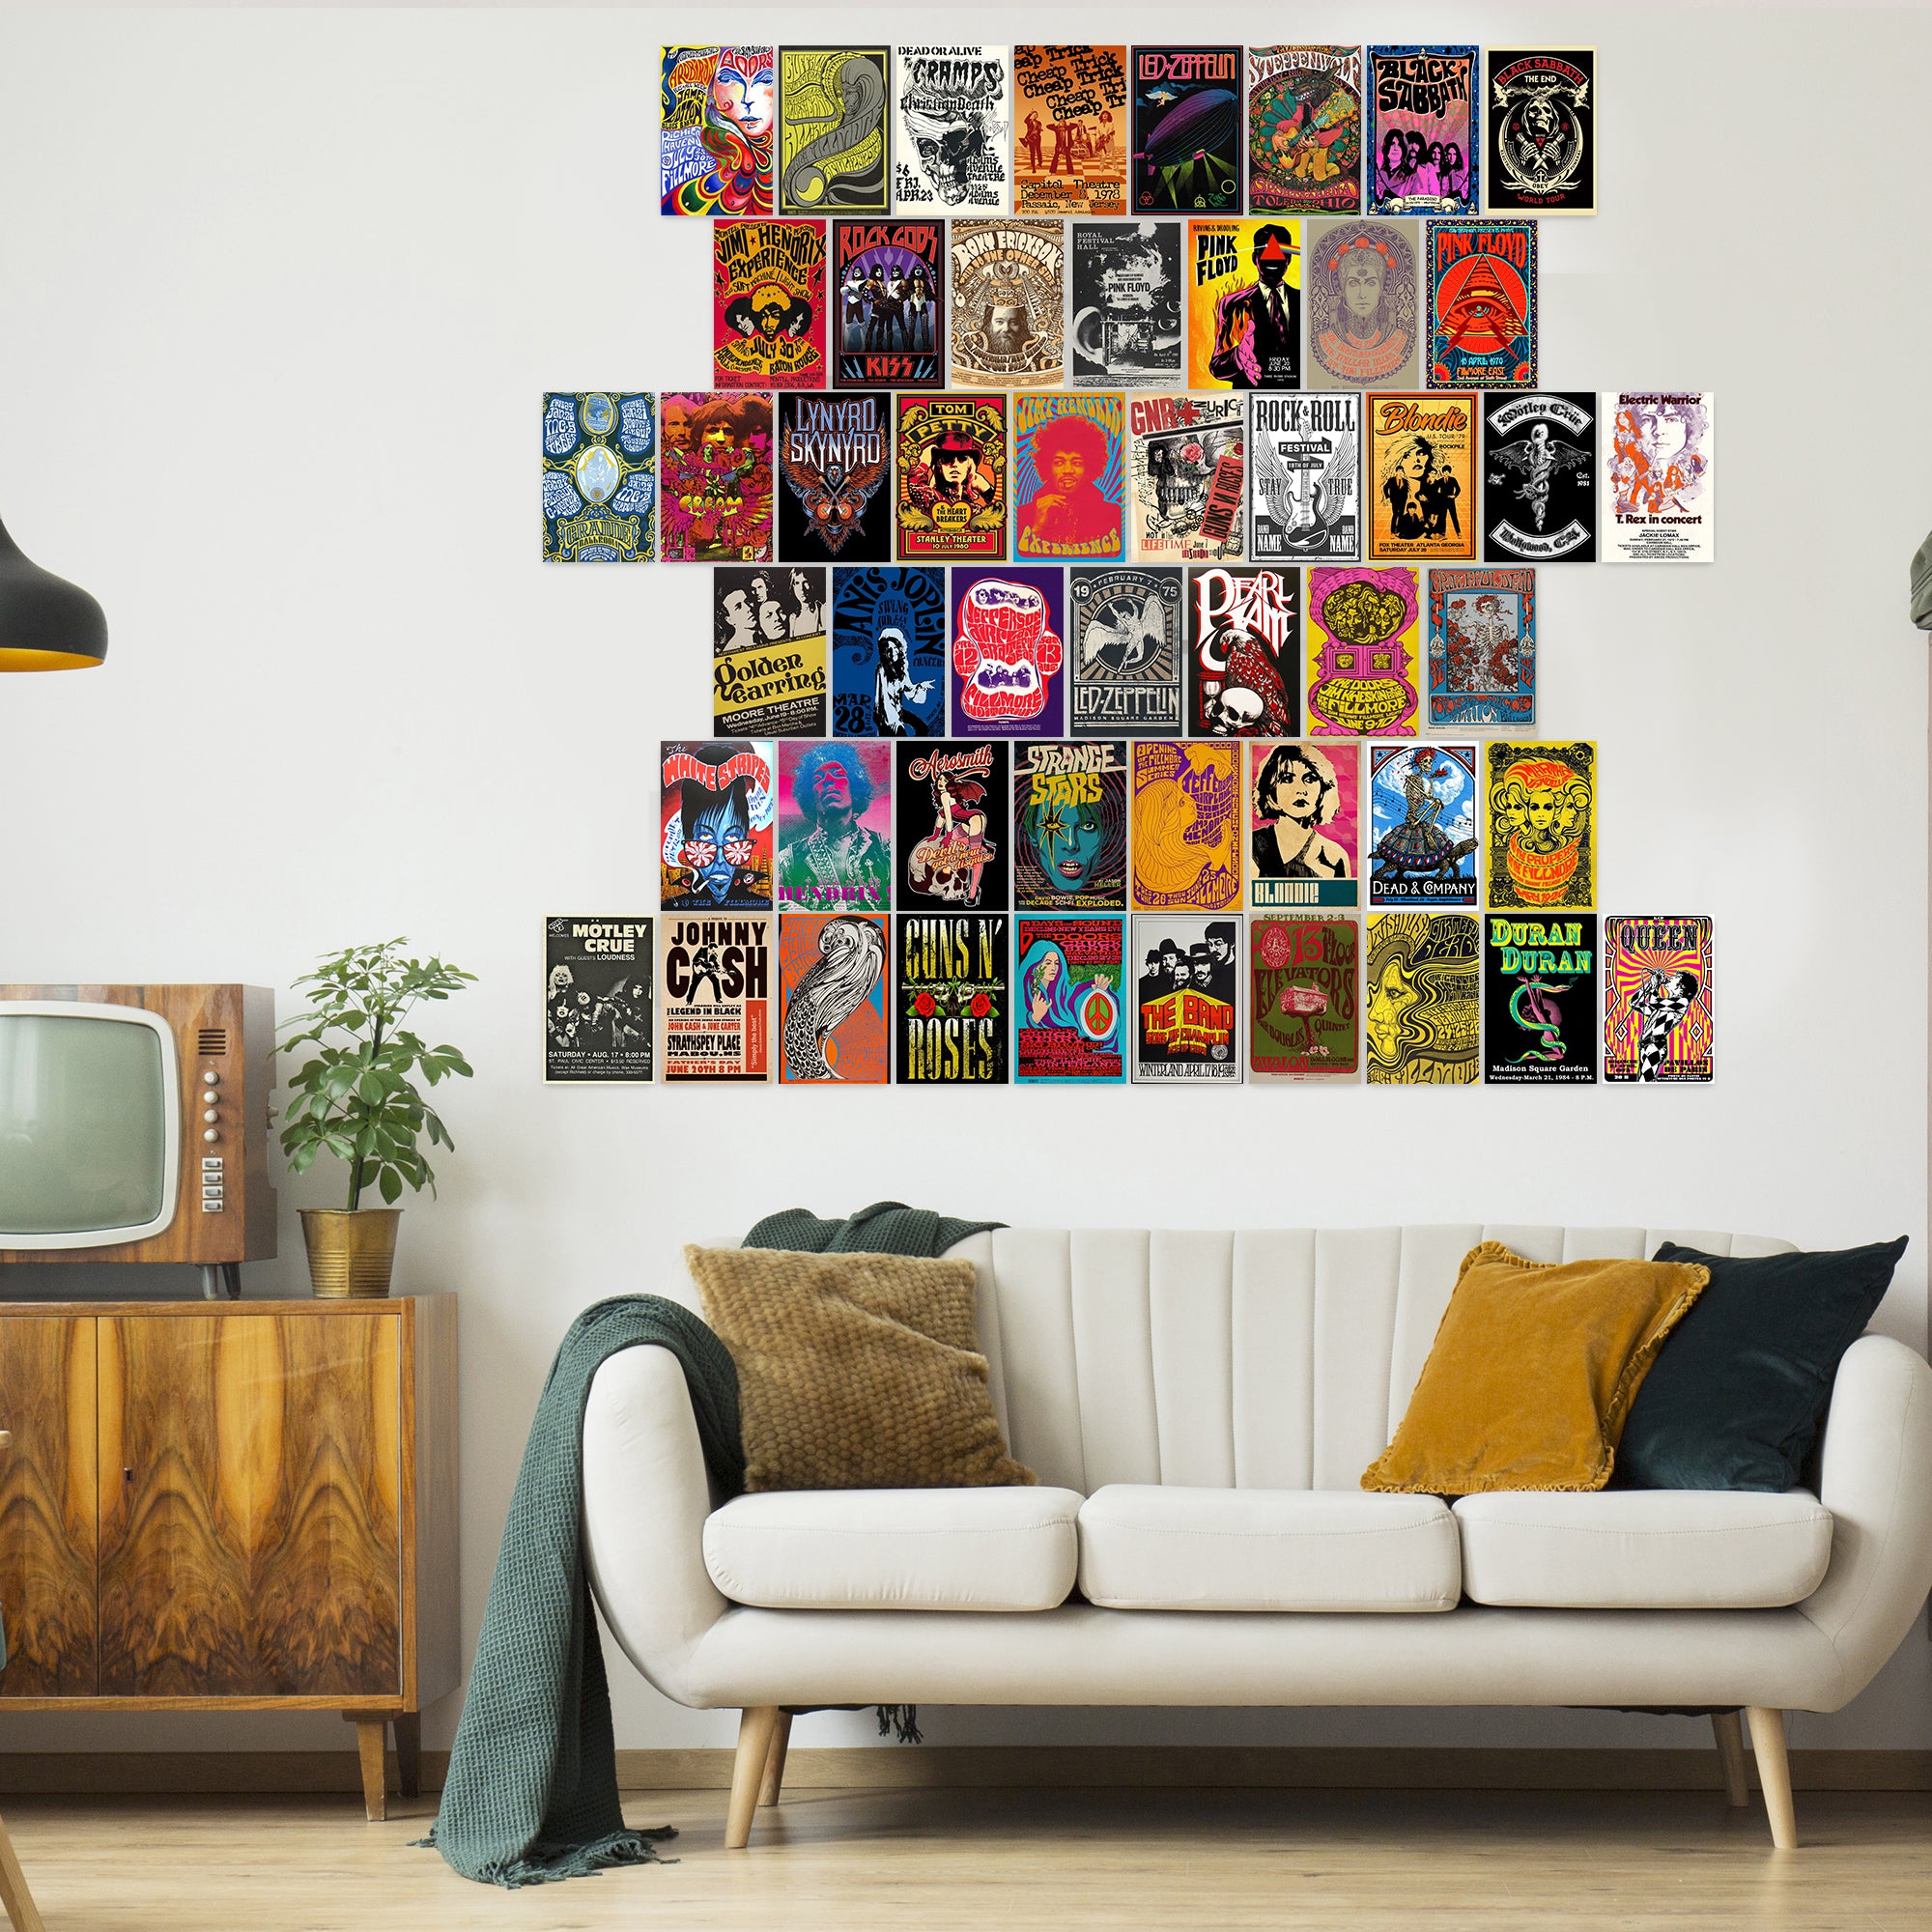 50pcs Vintage Rock Poster Aesthetic Wall Collage Kit Photo Collection Display for Dorm Art Prints Retro Classic Rock Band Posters Room Decor